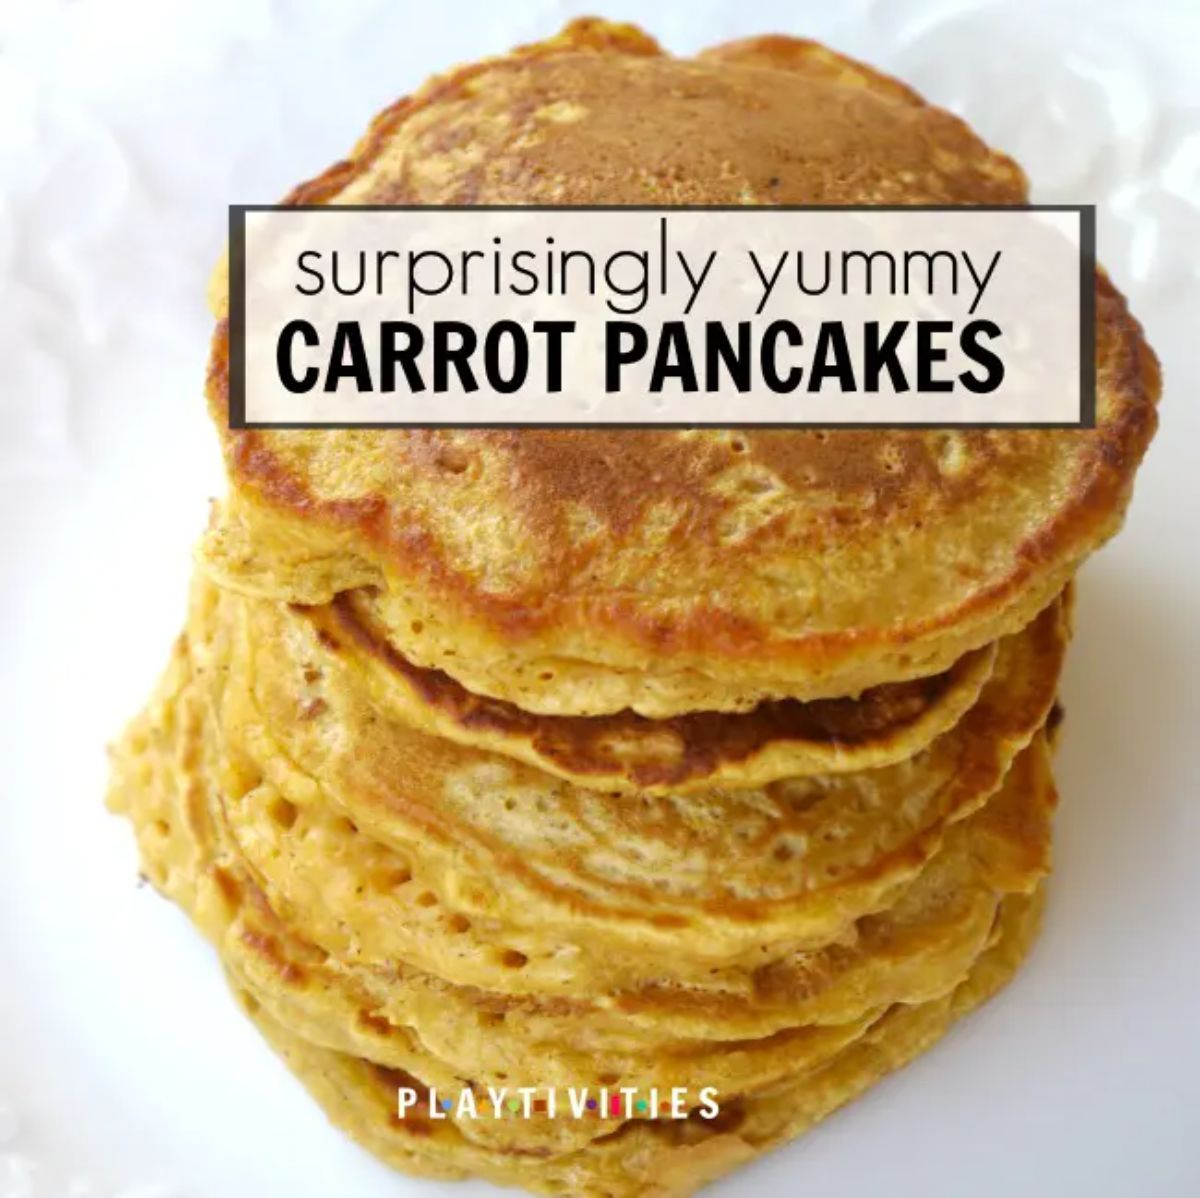 A stack of small pancakes sit on a white background. The text reads "surprisingly yummy carrot pancakes"